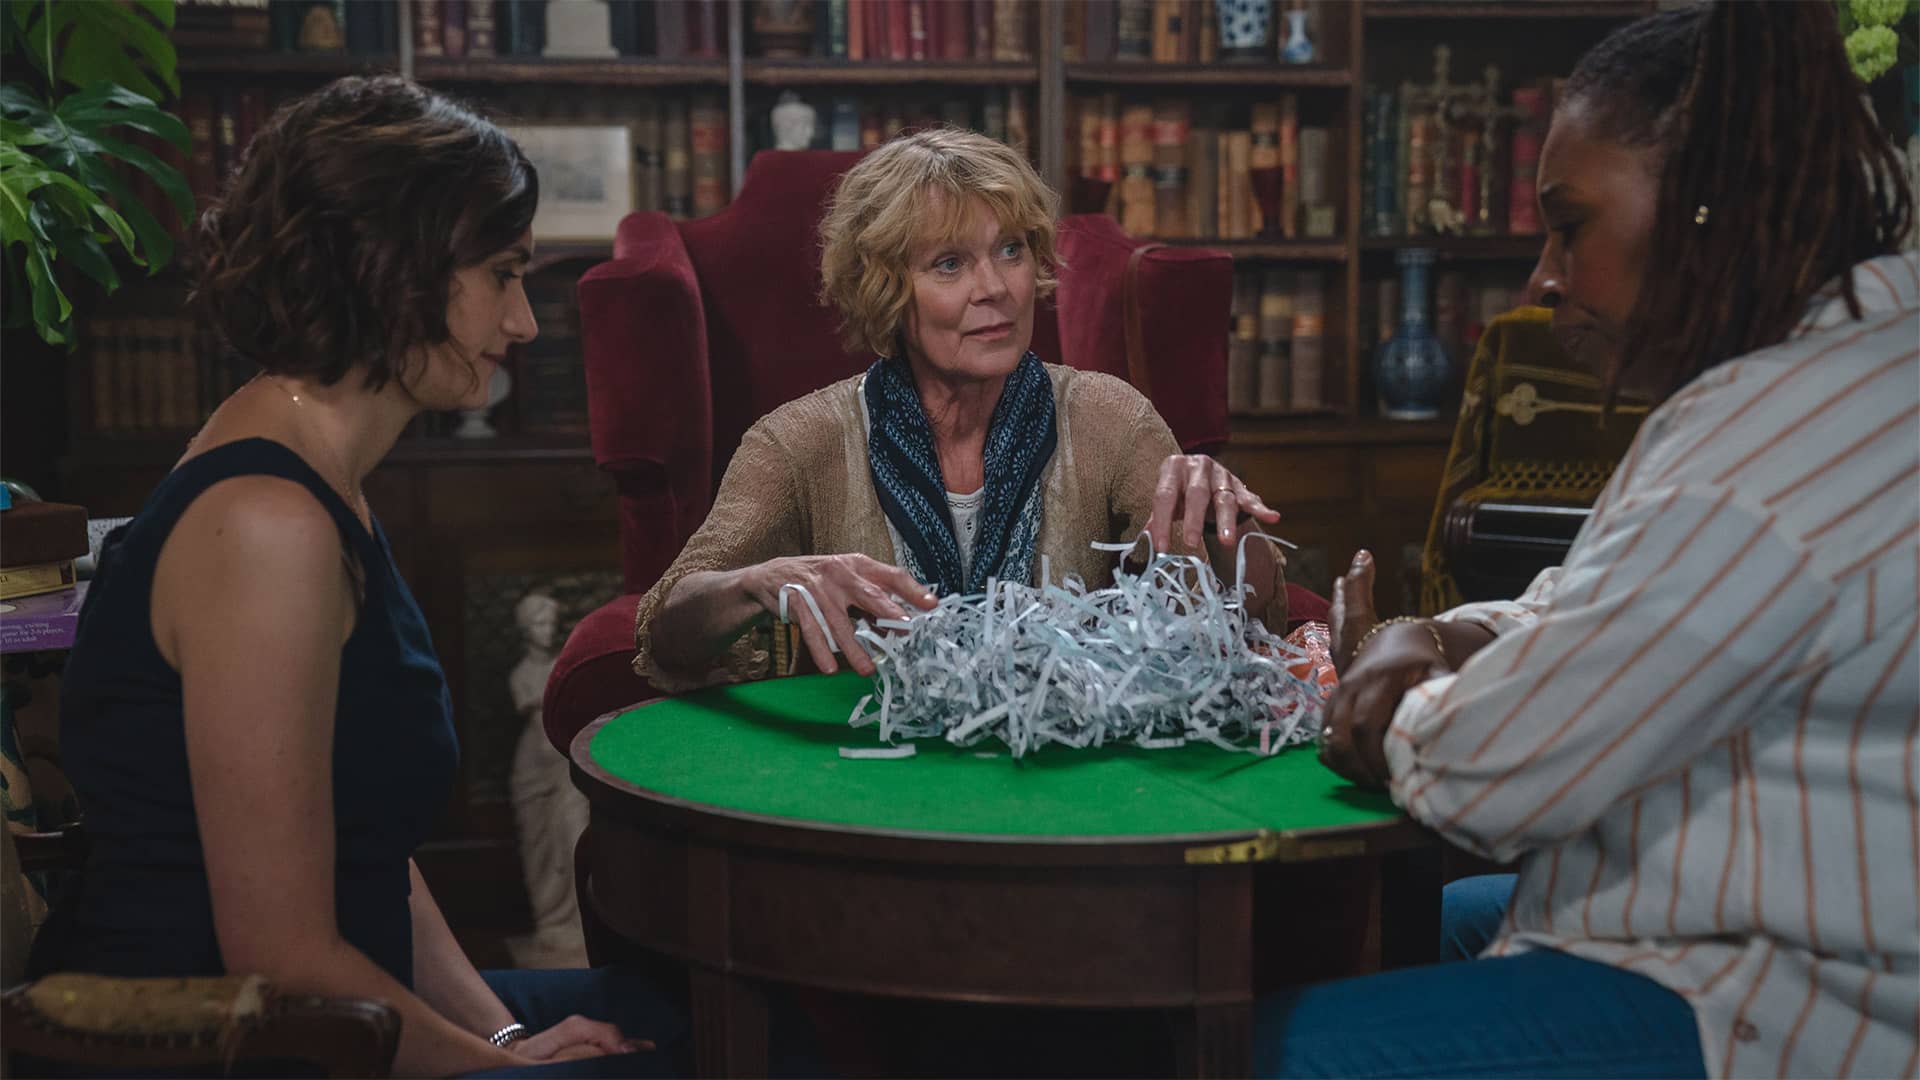 Cara Horgan as Becks Starling, Samantha Bond as Judith Potts, and Jo Martin as Suzie Harris around the library table in 'The Marlow Murder Club' 